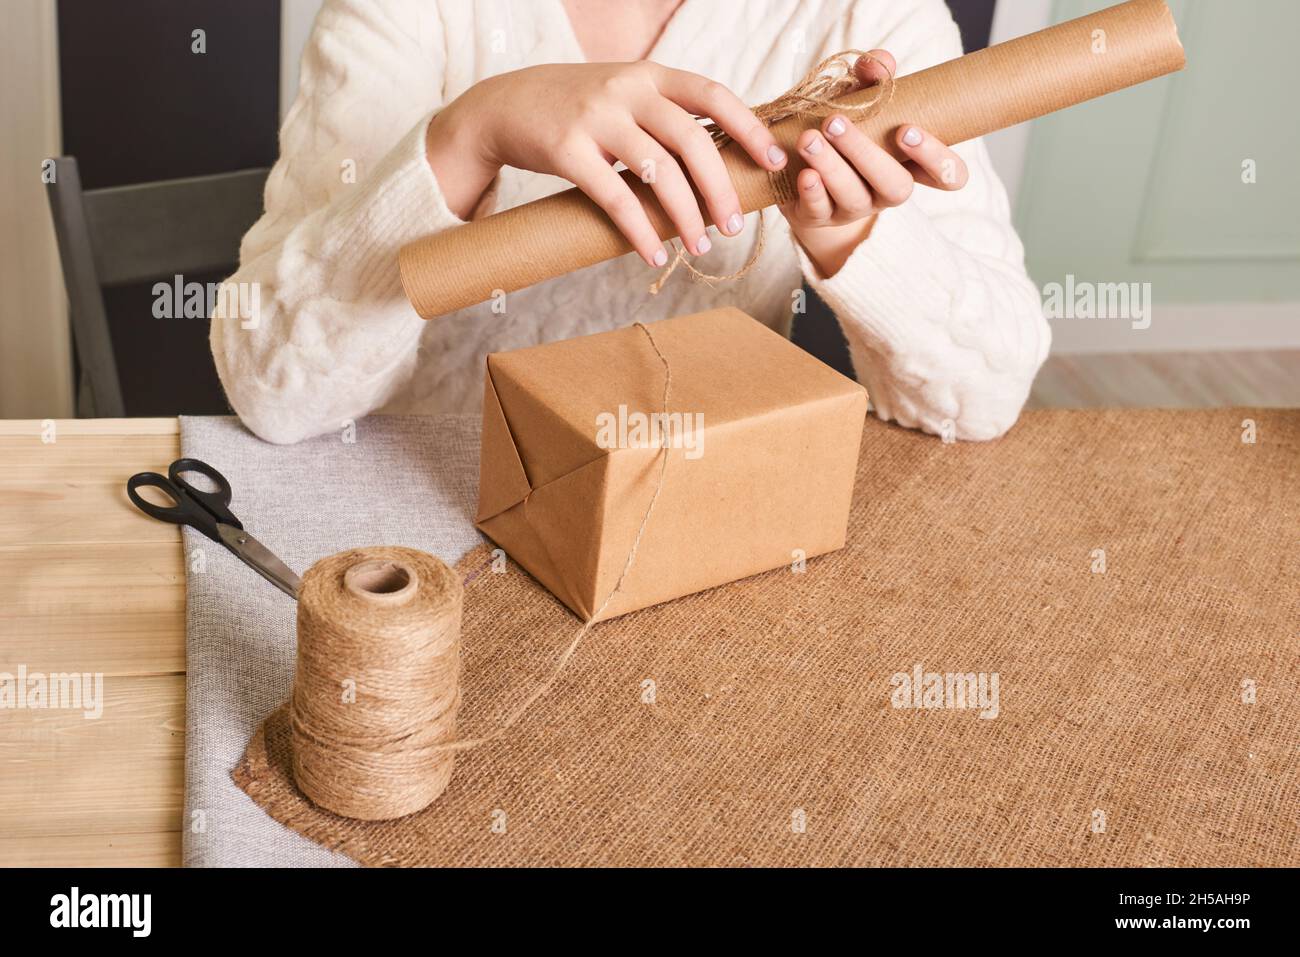 Popular in many fields, kraft paper twisted into a roll, kraft paper for  packing parcels, gifts, food, top view Stock Photo